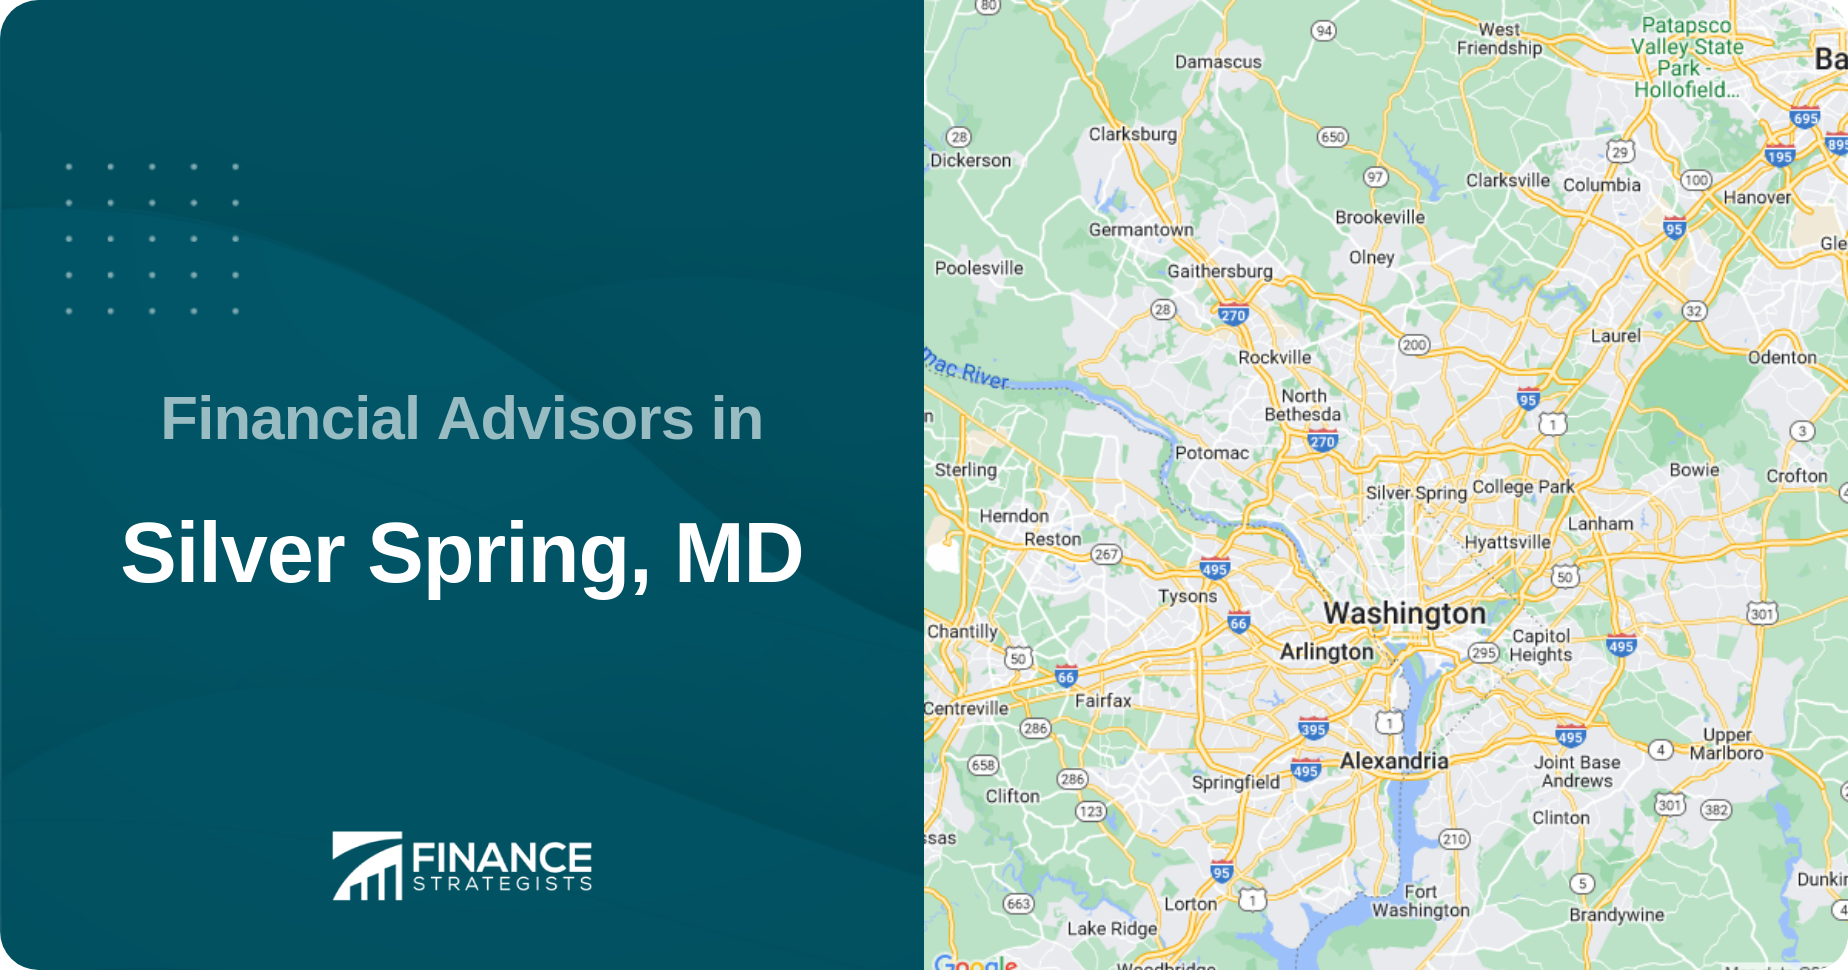 Financial Advisors in Silver Spring, MD